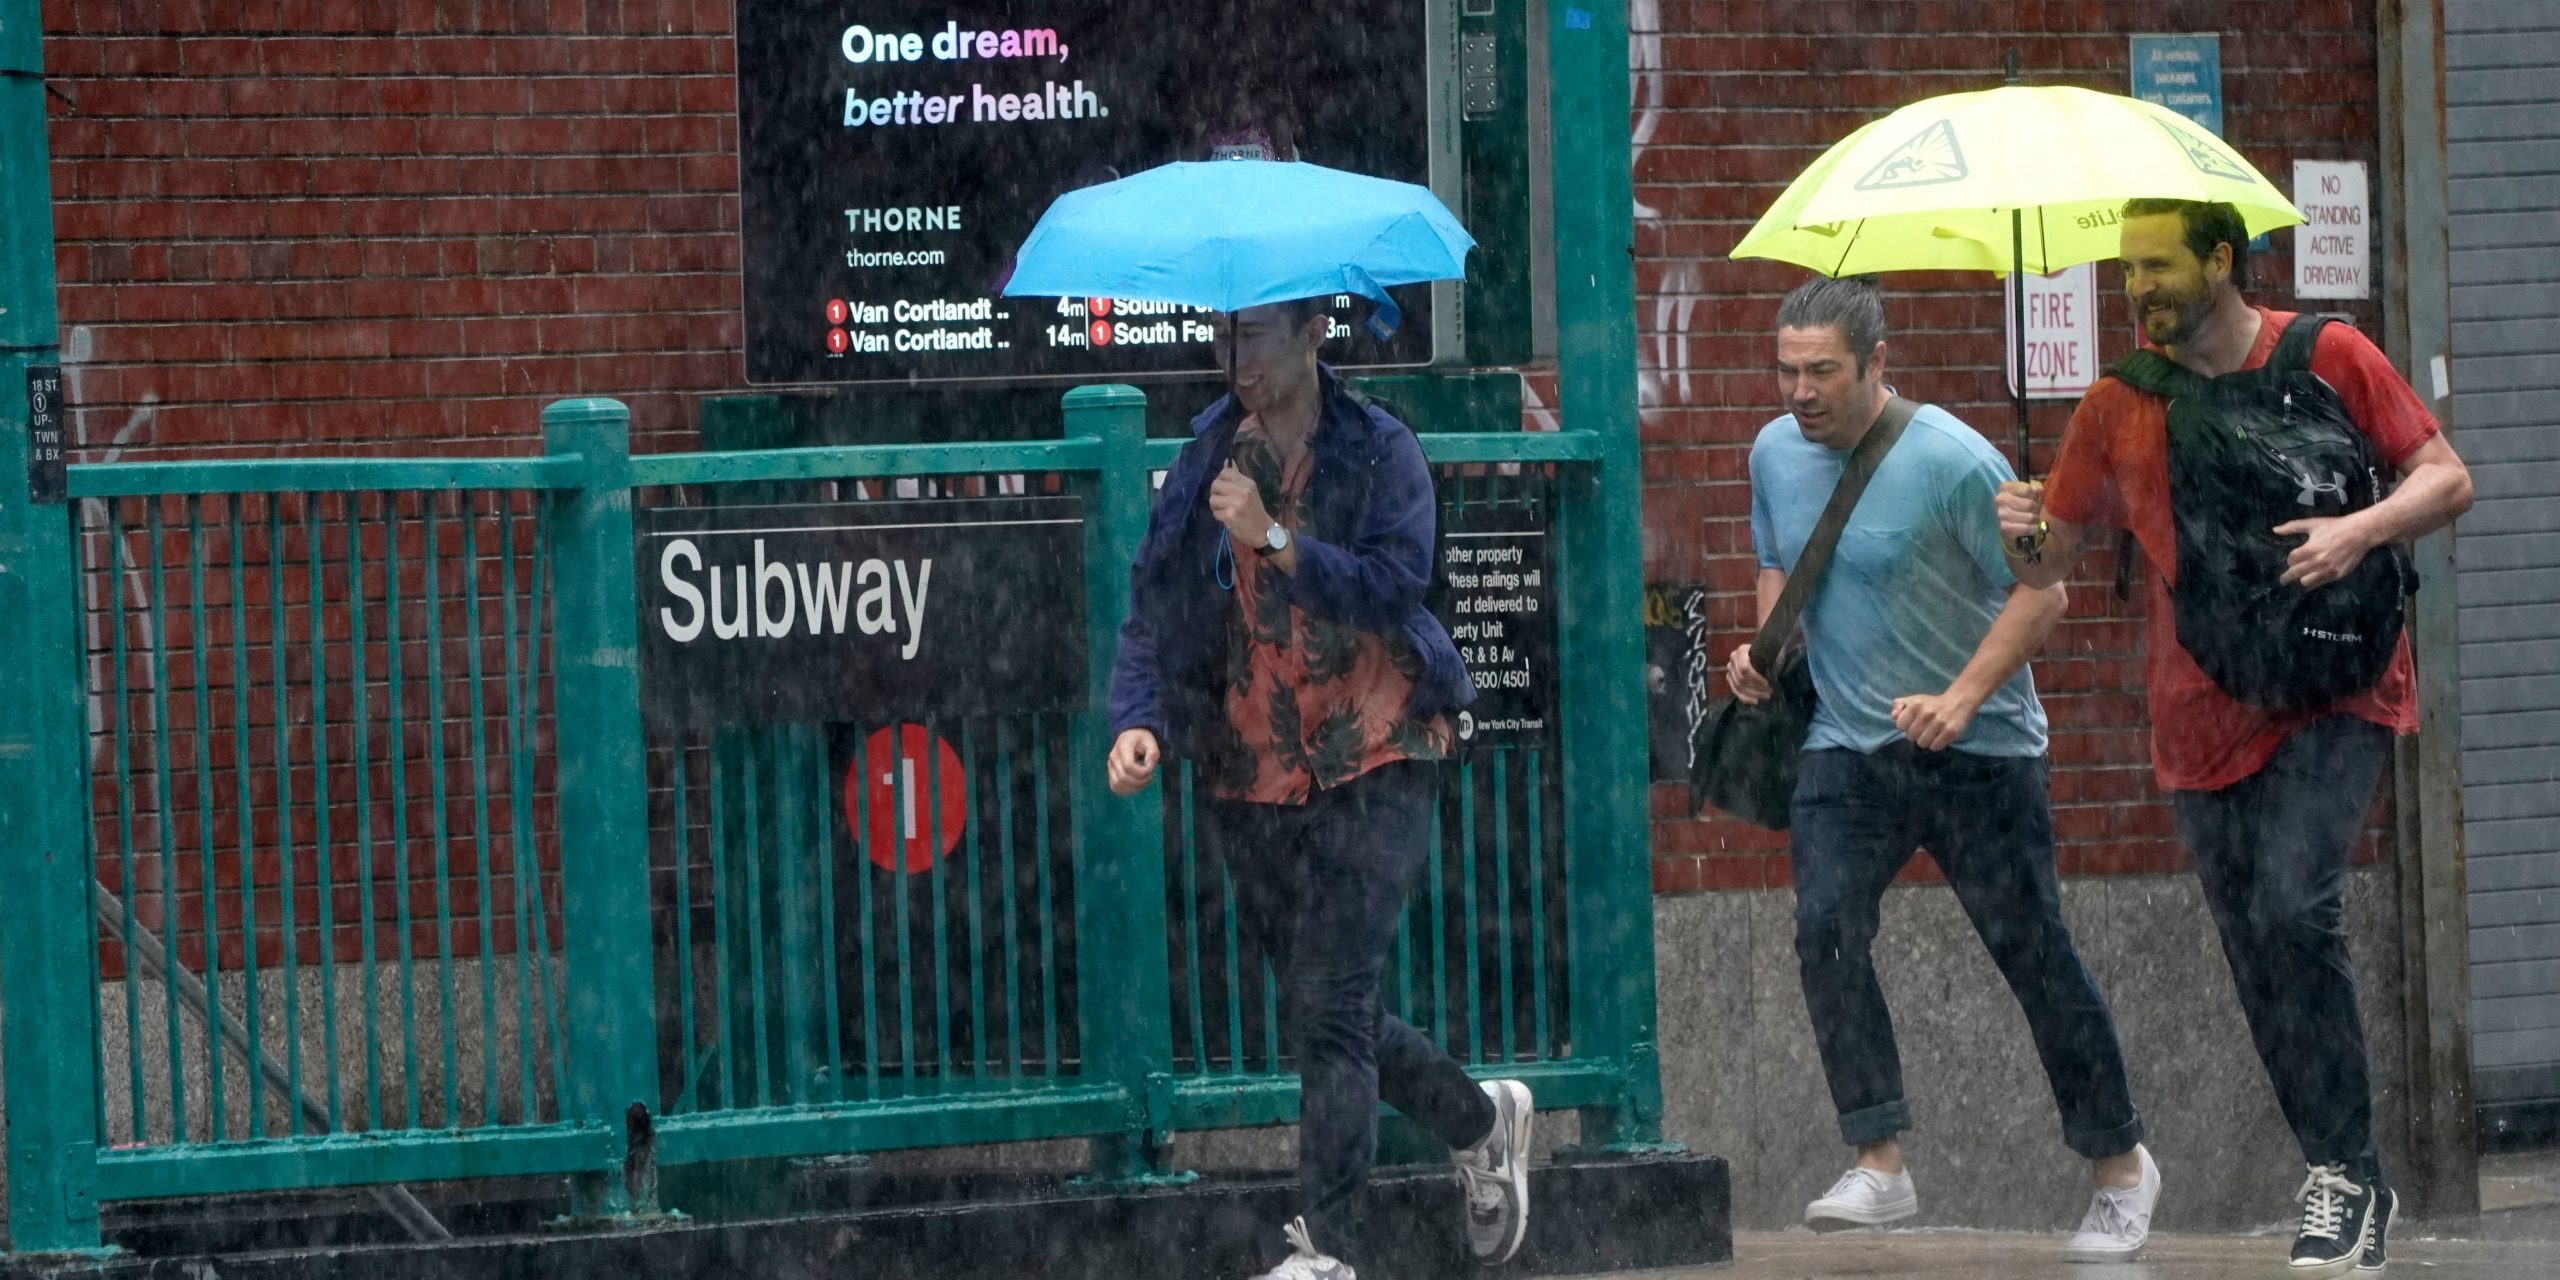 People run in the rain outside a subway station in New York City.